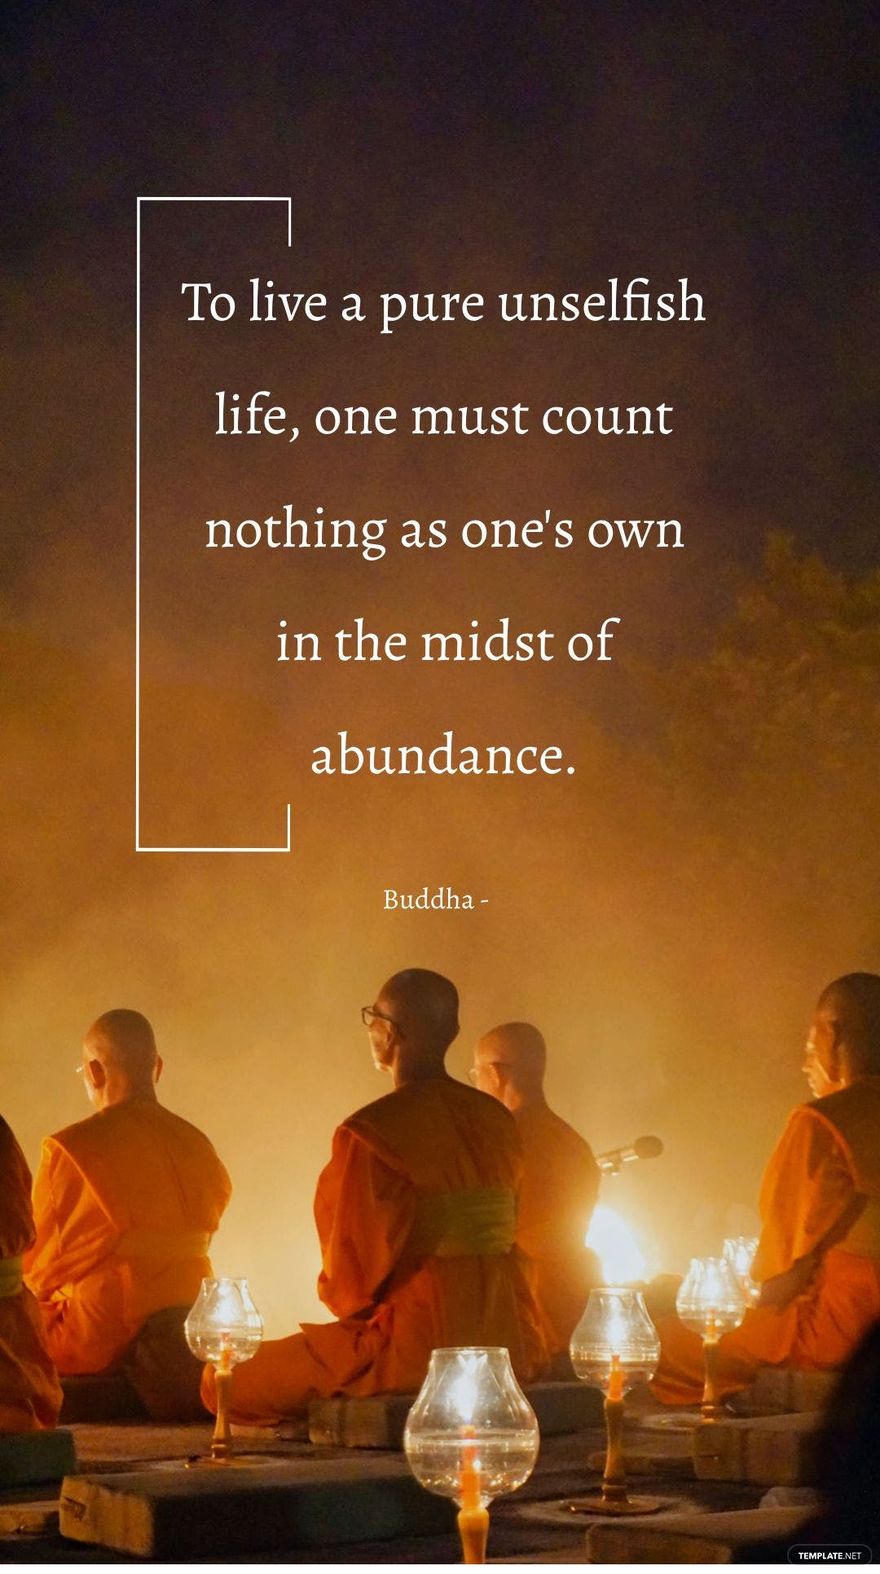 Buddha - To live a pure unselfish life, one must count nothing as one's own in the midst of abundance.